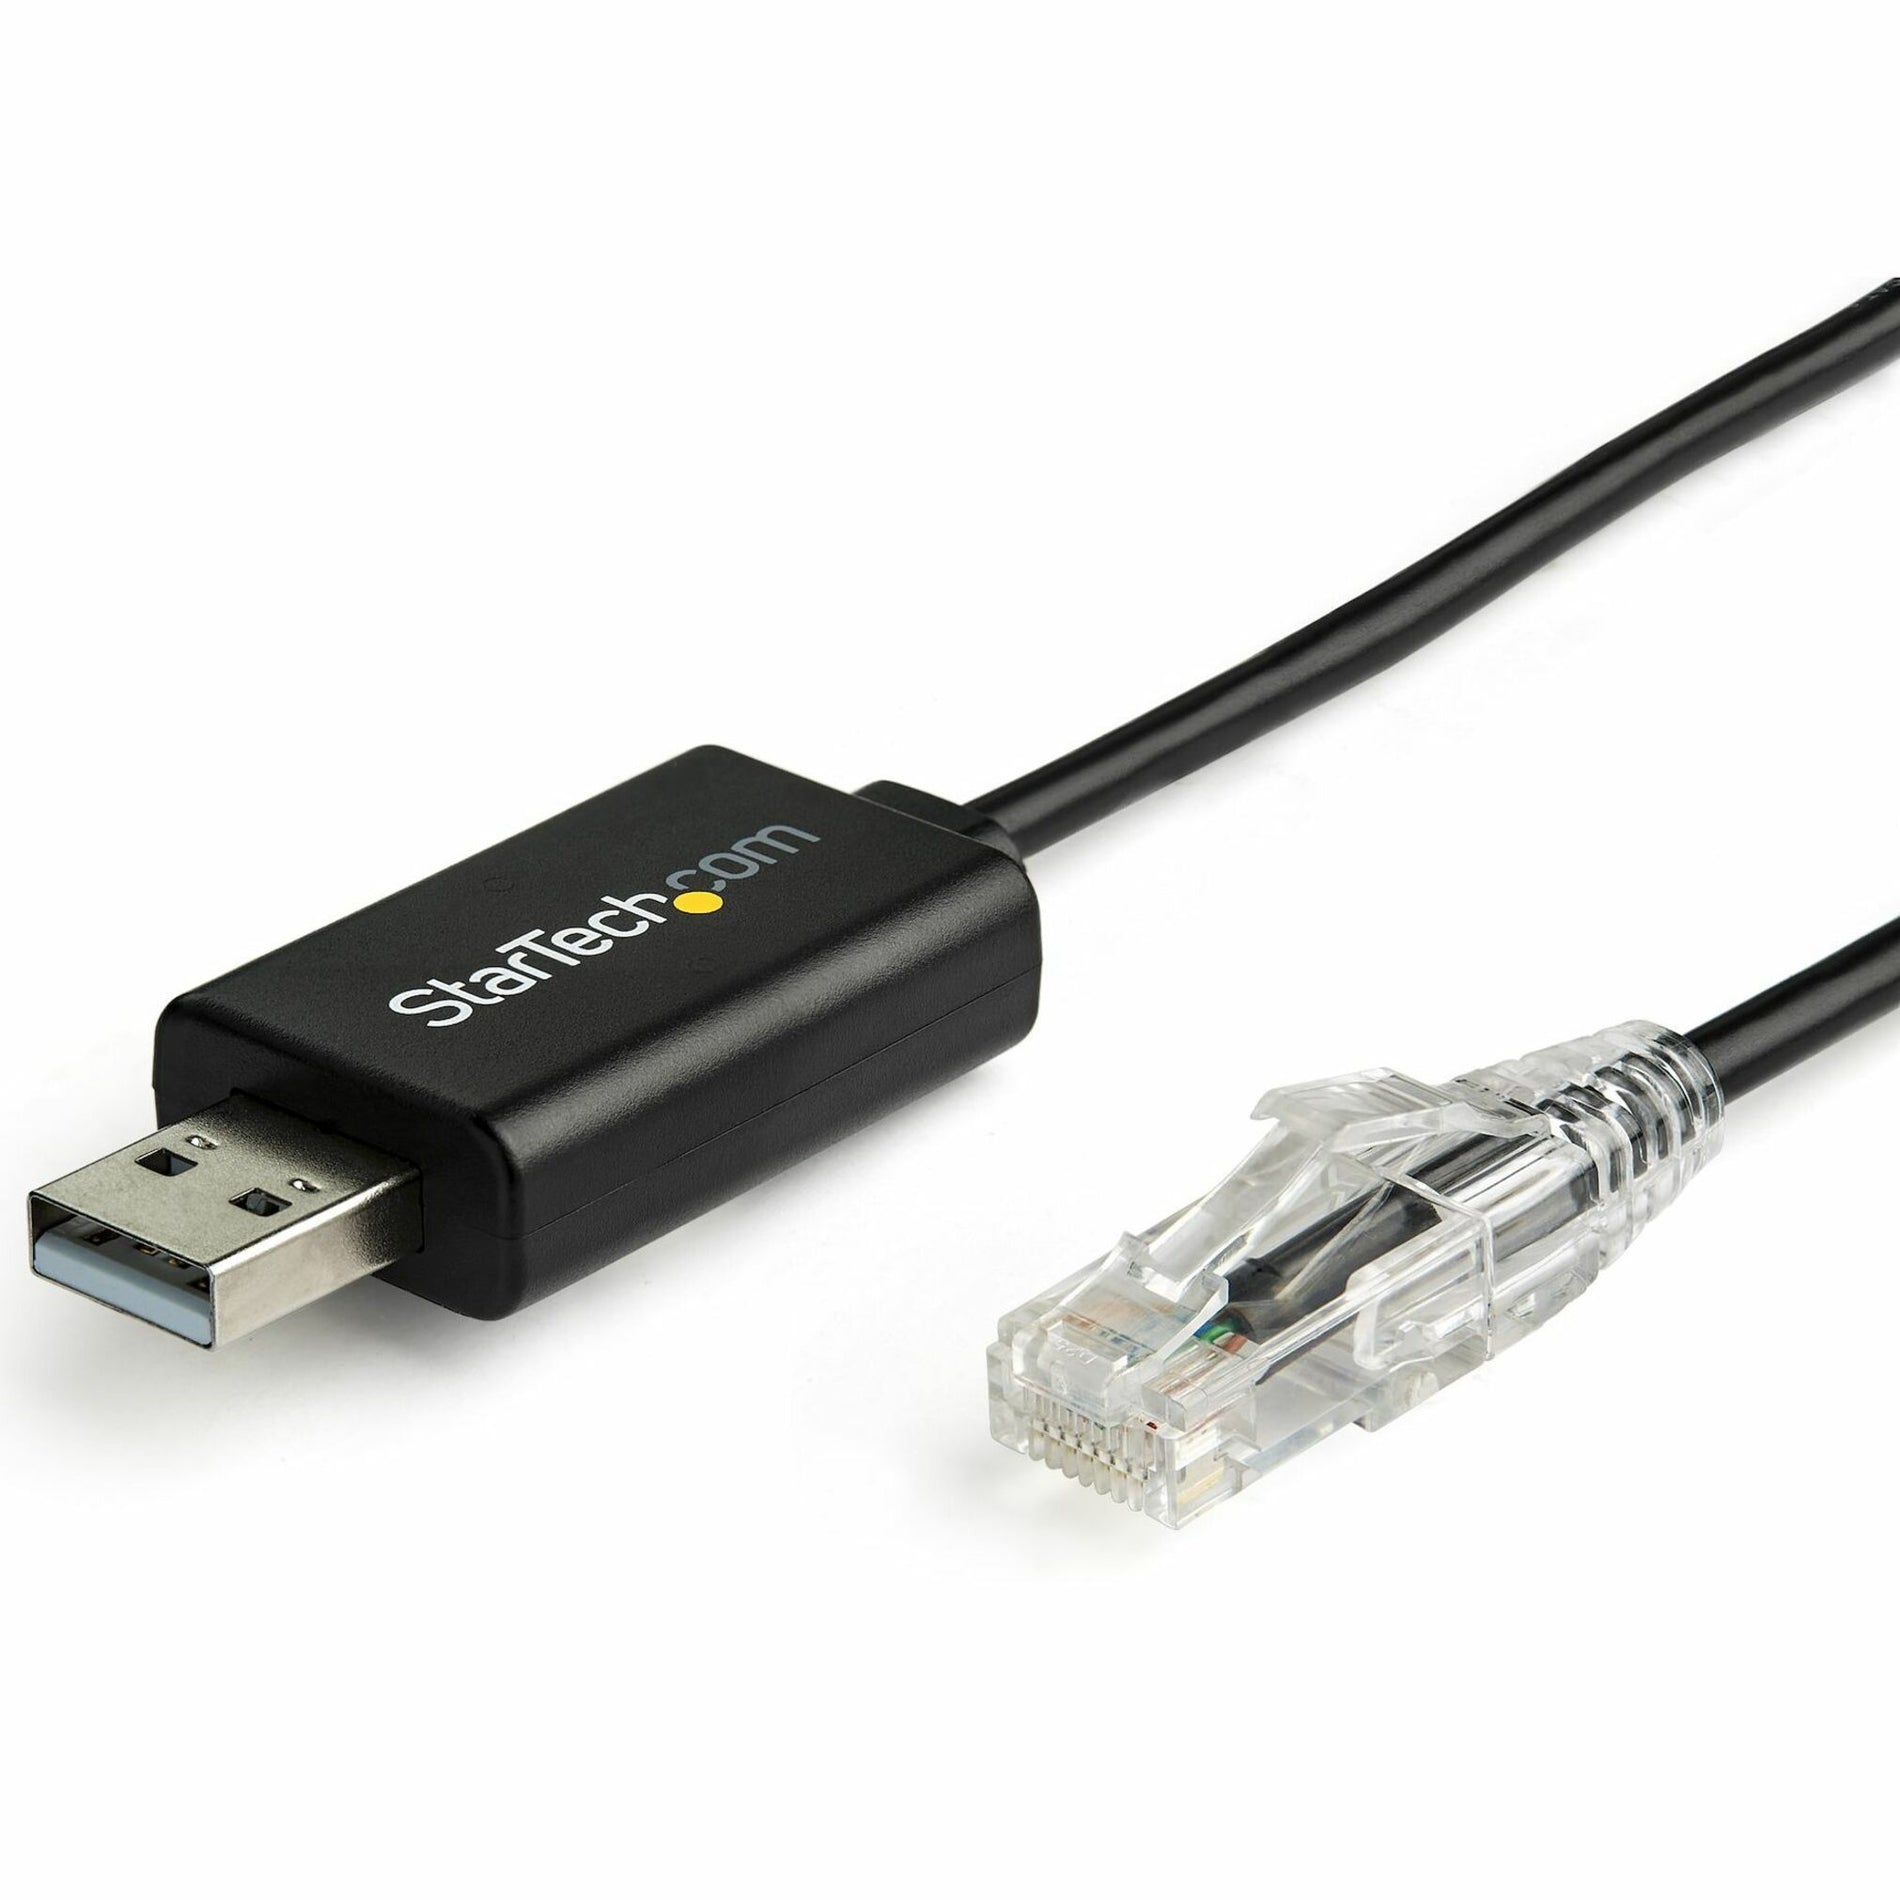 StarTech.com ICUSBROLLOVR 6 ft 1.8 Cisco USB Console Cable USB to RJ45 Rollover Cable, Transfer rates up to 460Kbps, Windows, Mac and Linux Compatible